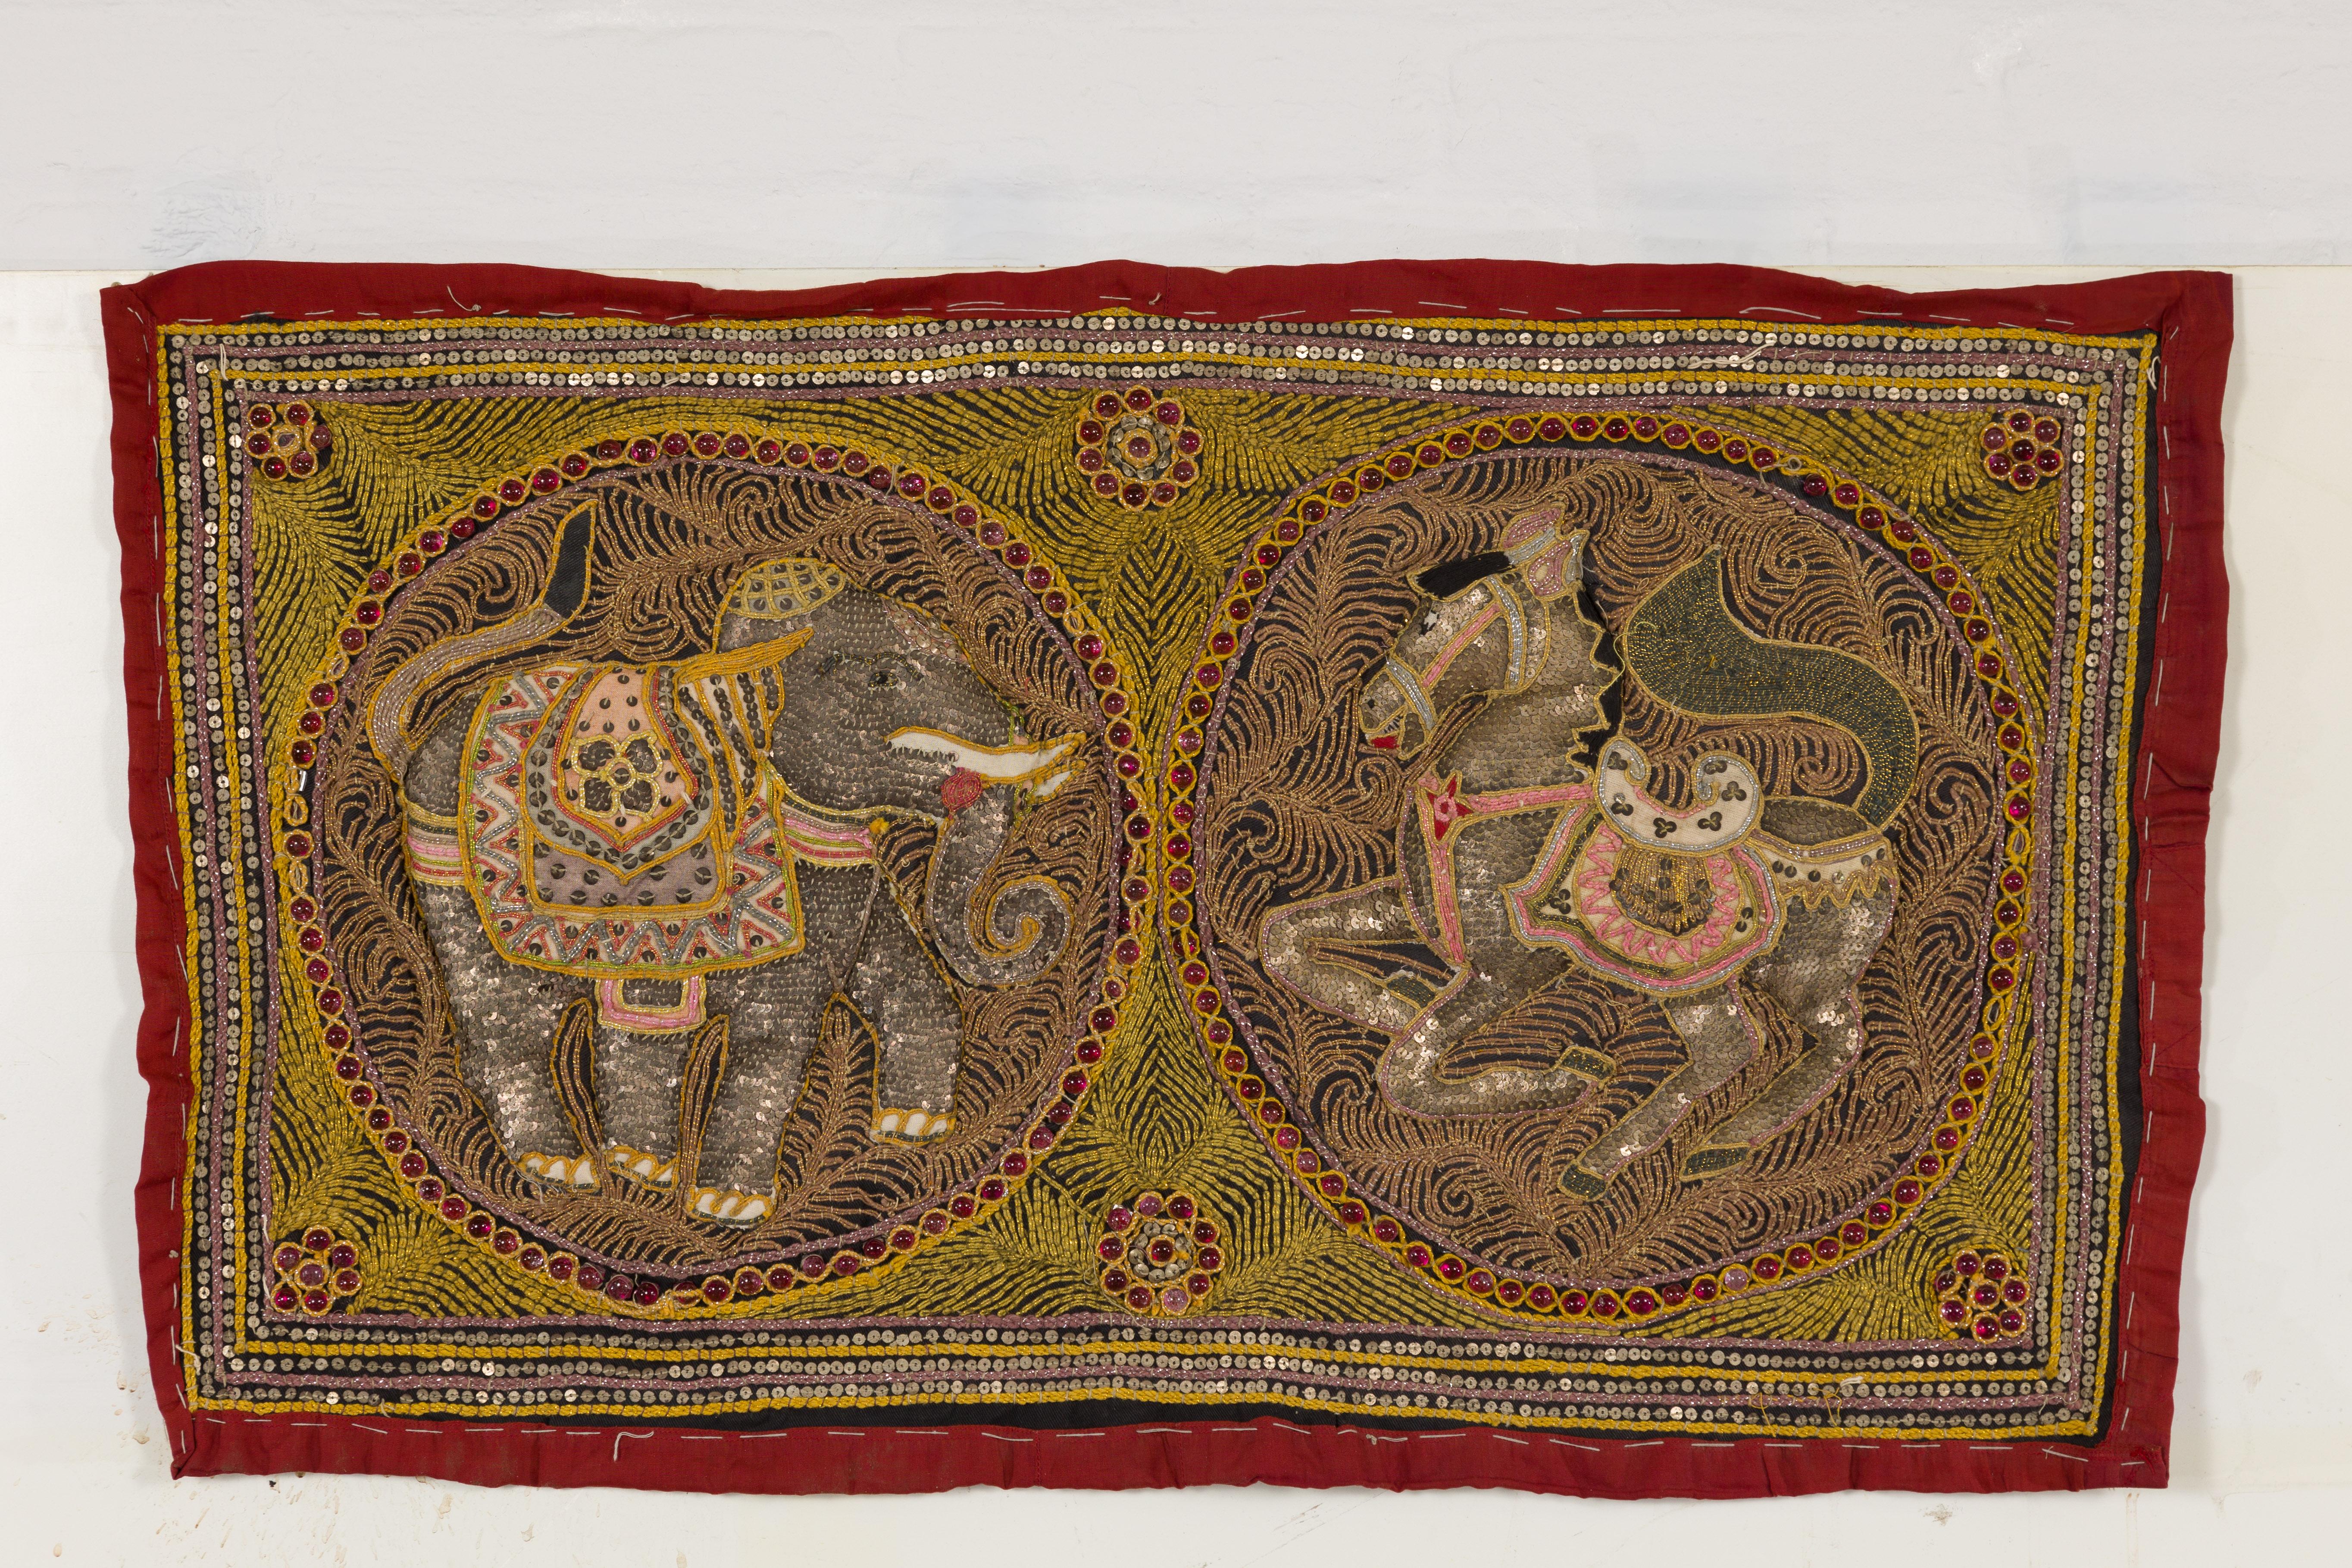 A 19th century Kalaga embroidered tapestry depicting a horse and an elephant with golden and pink threads, silver colored sequins and petite red beads. Immerse yourself in the rich cultural tapestry of the East with this exquisite 19th century